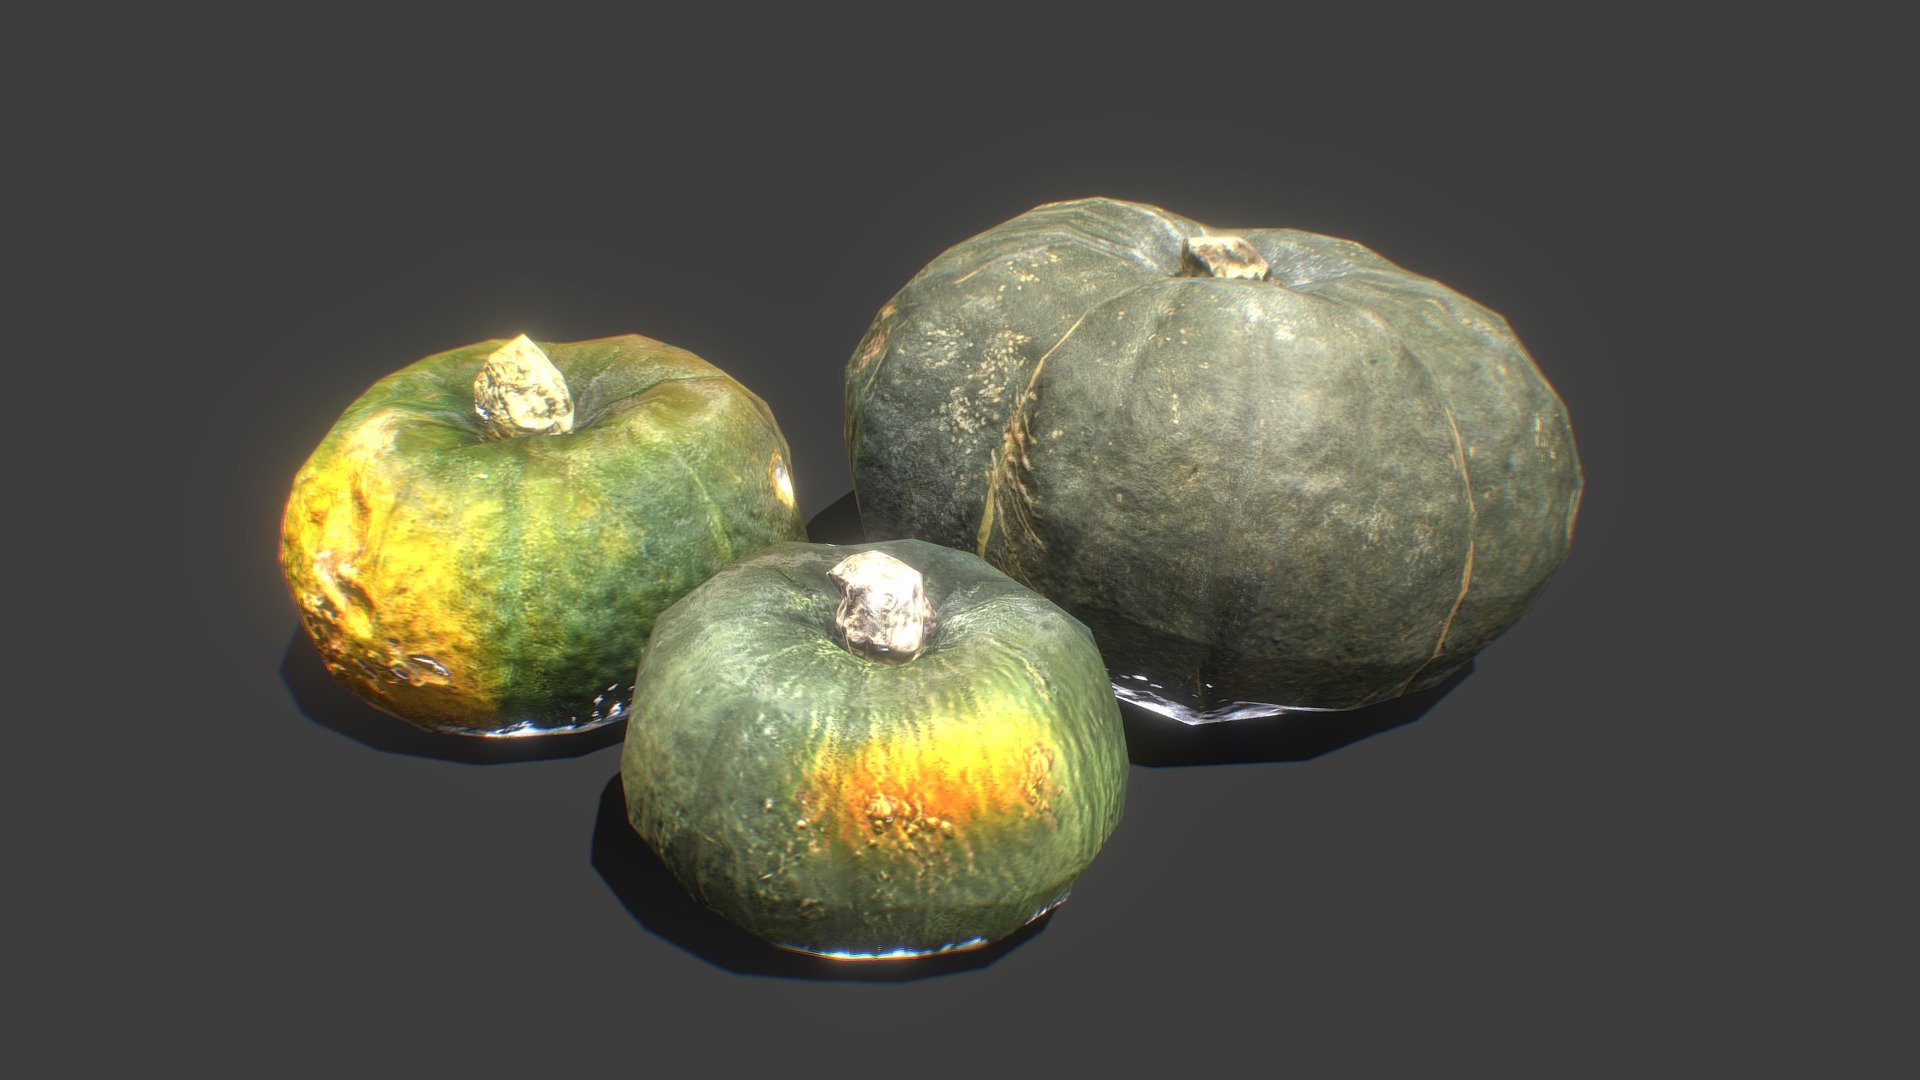 Check out my website for more products and better deals! &gt;&gt; SM5 by Heledahn &lt;&lt;


This is a digital 3d model of  three green pumpkins. The pumpkins have been scanned and retopologized from three different Japanese variety of green pumpkins, and the resulting models have an excellent quality and detail, while maintaining a very small poly count.

The textures can be interchanged between the models, allowing for a great variety of pumpkins. (Also interchangable with Halloween Pumpkins)

(TIF DISPLACEMENT MAP TEXTURES ONLY FOR SALE IN MY WEBSITE 🔼)

This product will achieve realistic results in your rendering projects and animations, being greatly suited for close-ups due to their high quality topology and PBR shading 3d model